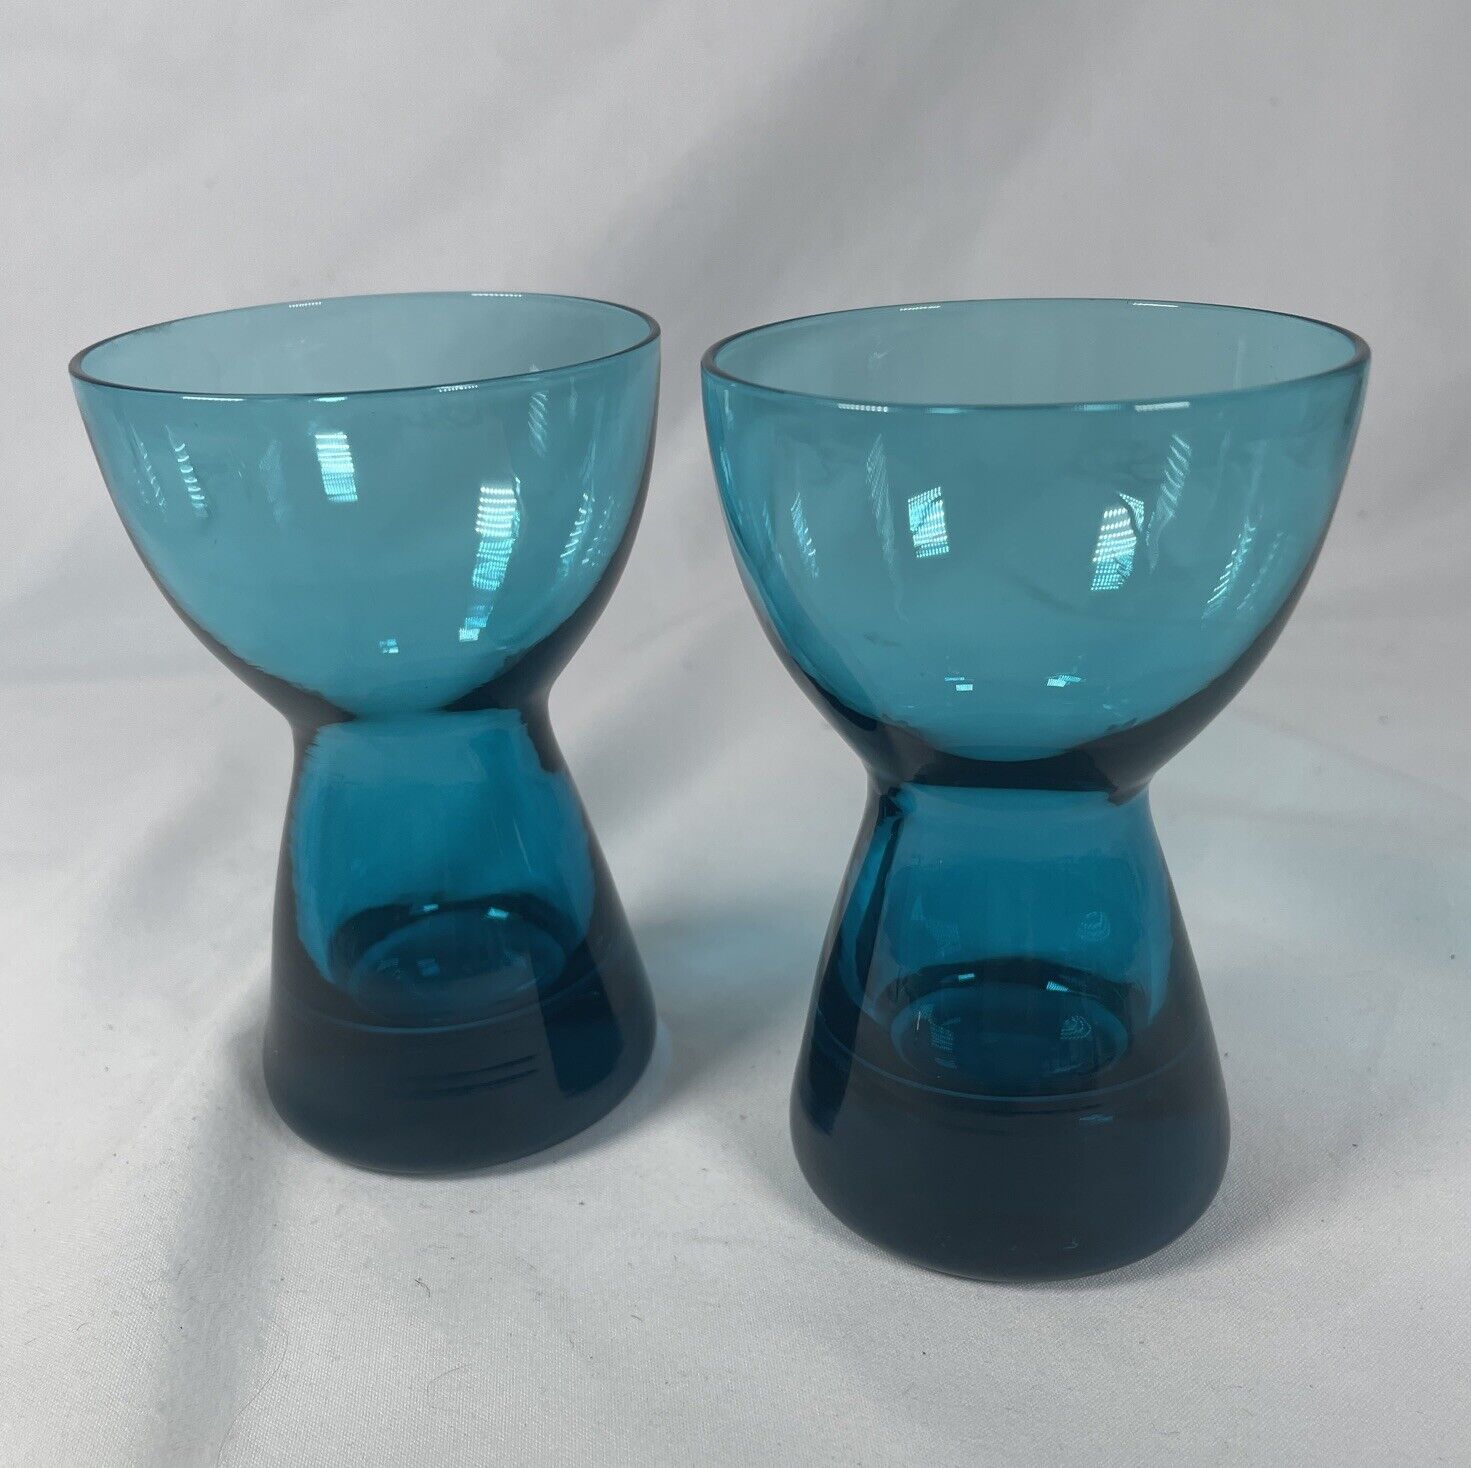 2 Morgantown Barron Glass Peacock Turquoise Teal Candlestick Holders MCM 1960s